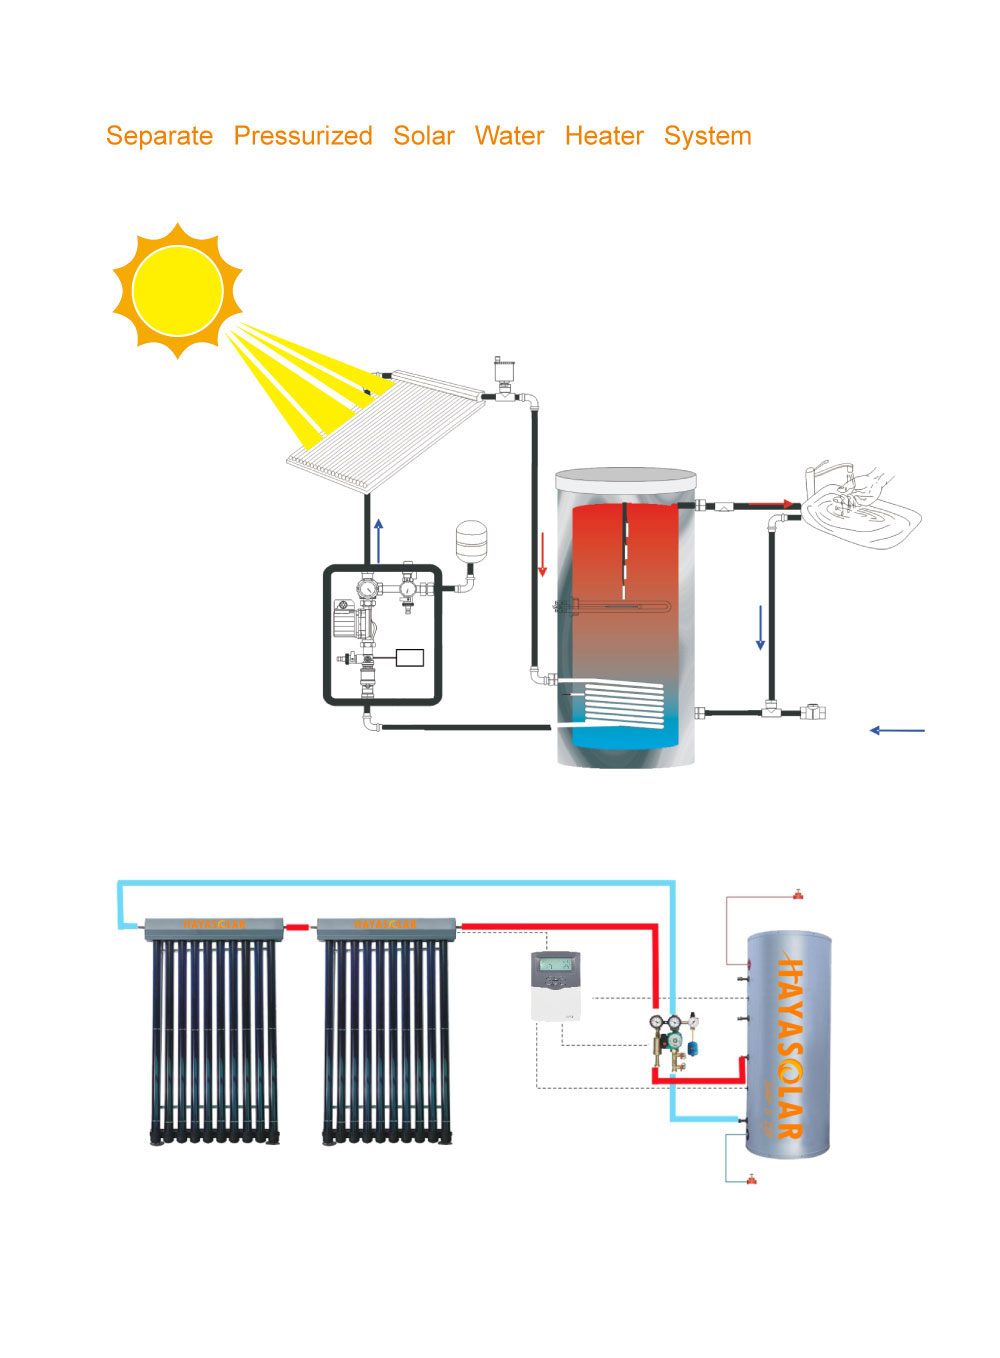 Separate Pressurized Solar Water Heater System